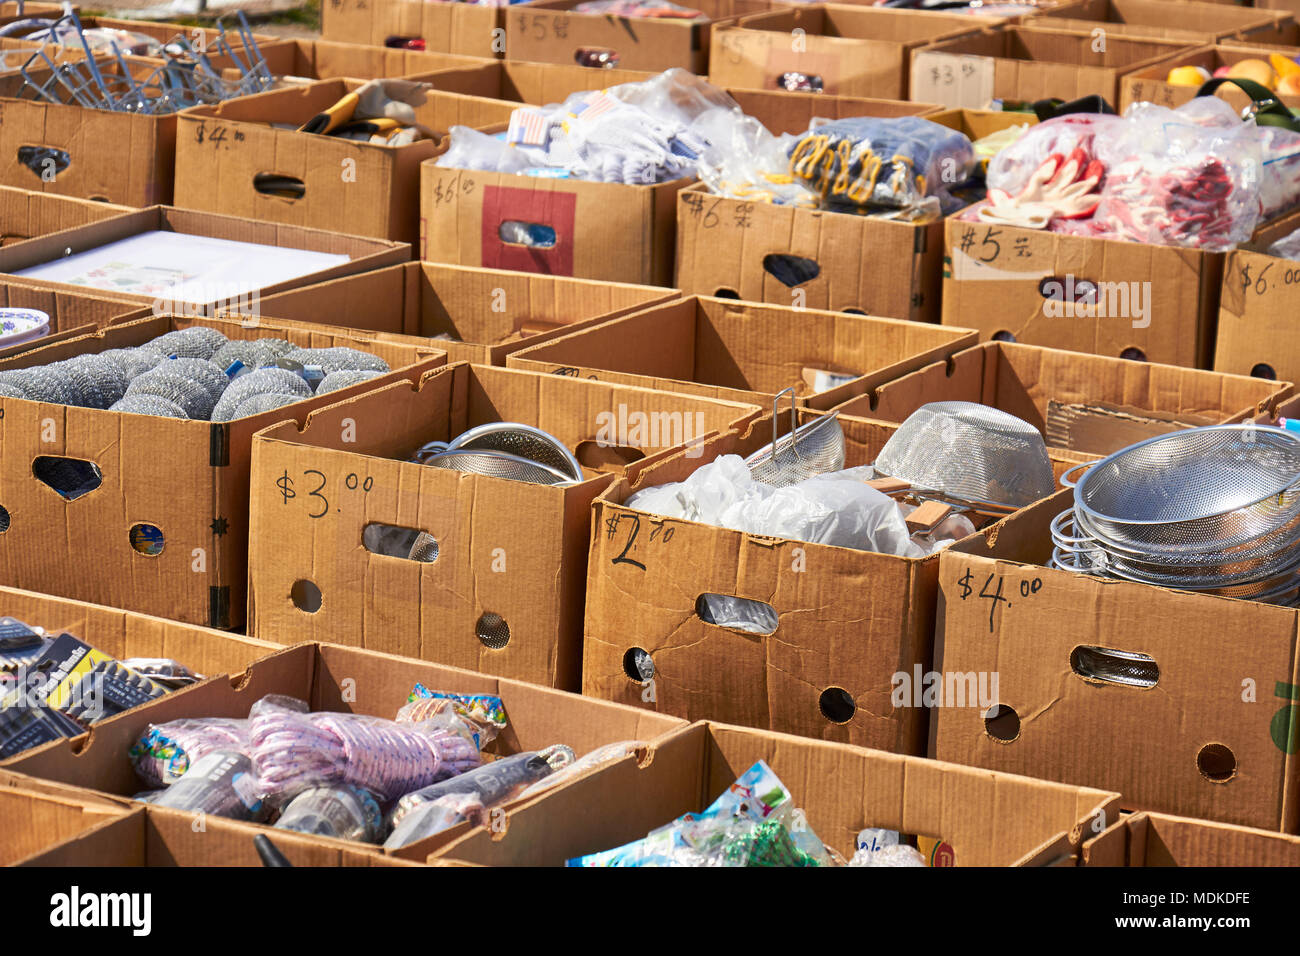 Boxes of goods for sale at the Green Dragon Market, Amish Country,  Ephrata, Pennsylvania, USA Stock Photo